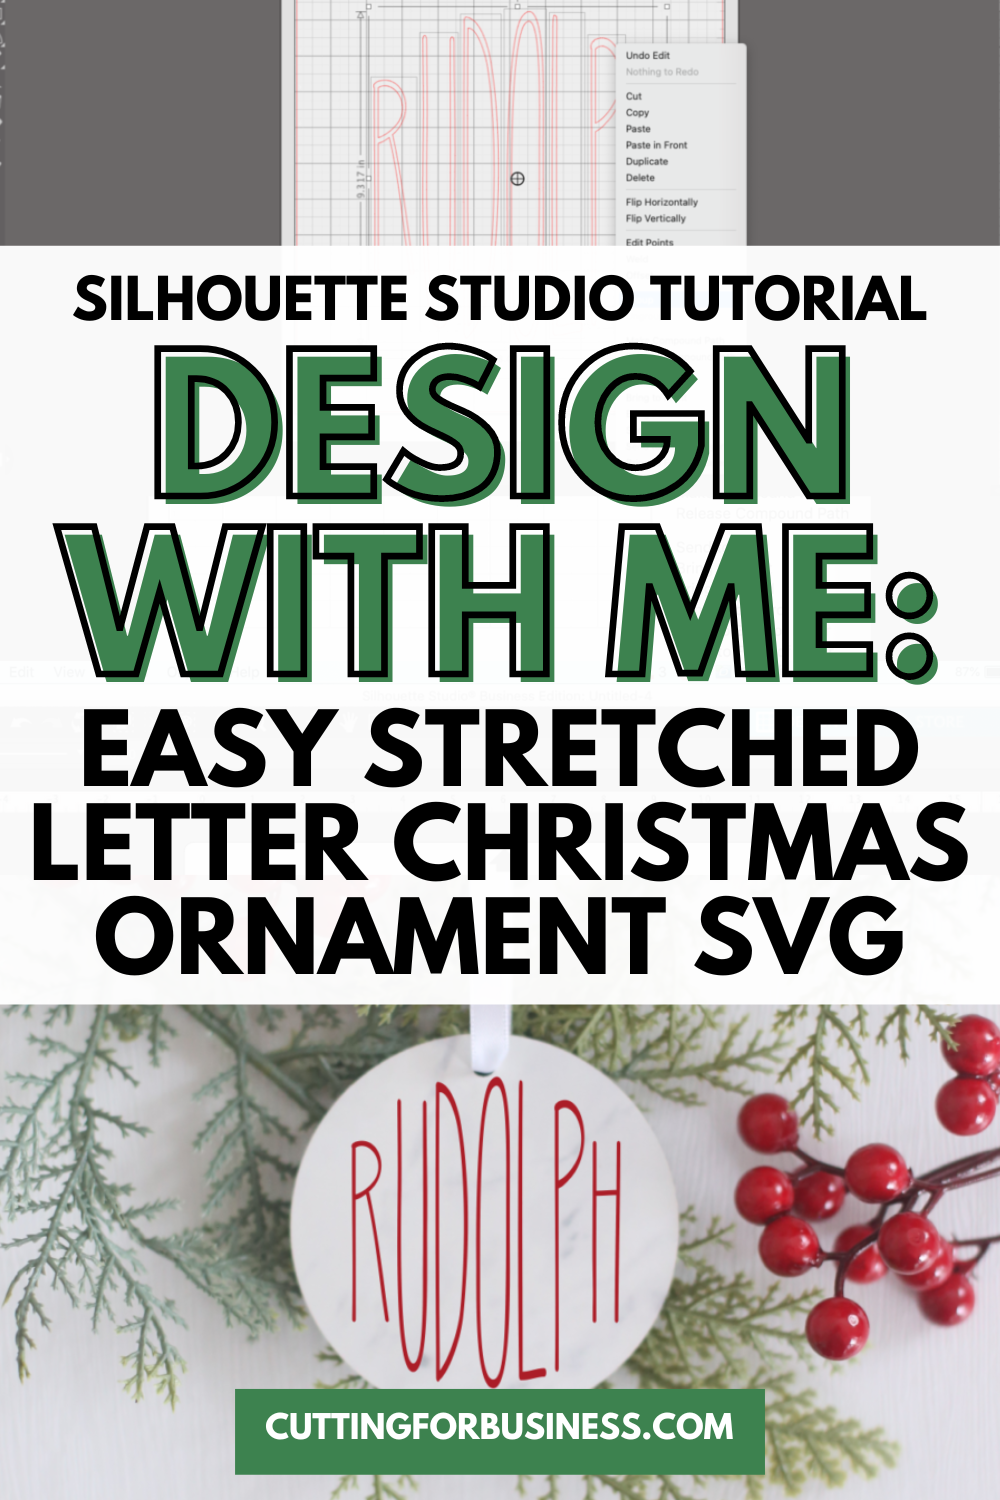 Silhouette Studio Tutorial: Easy Stretched Letter Christmas Ornament SVG - cuttingforbusiness.com